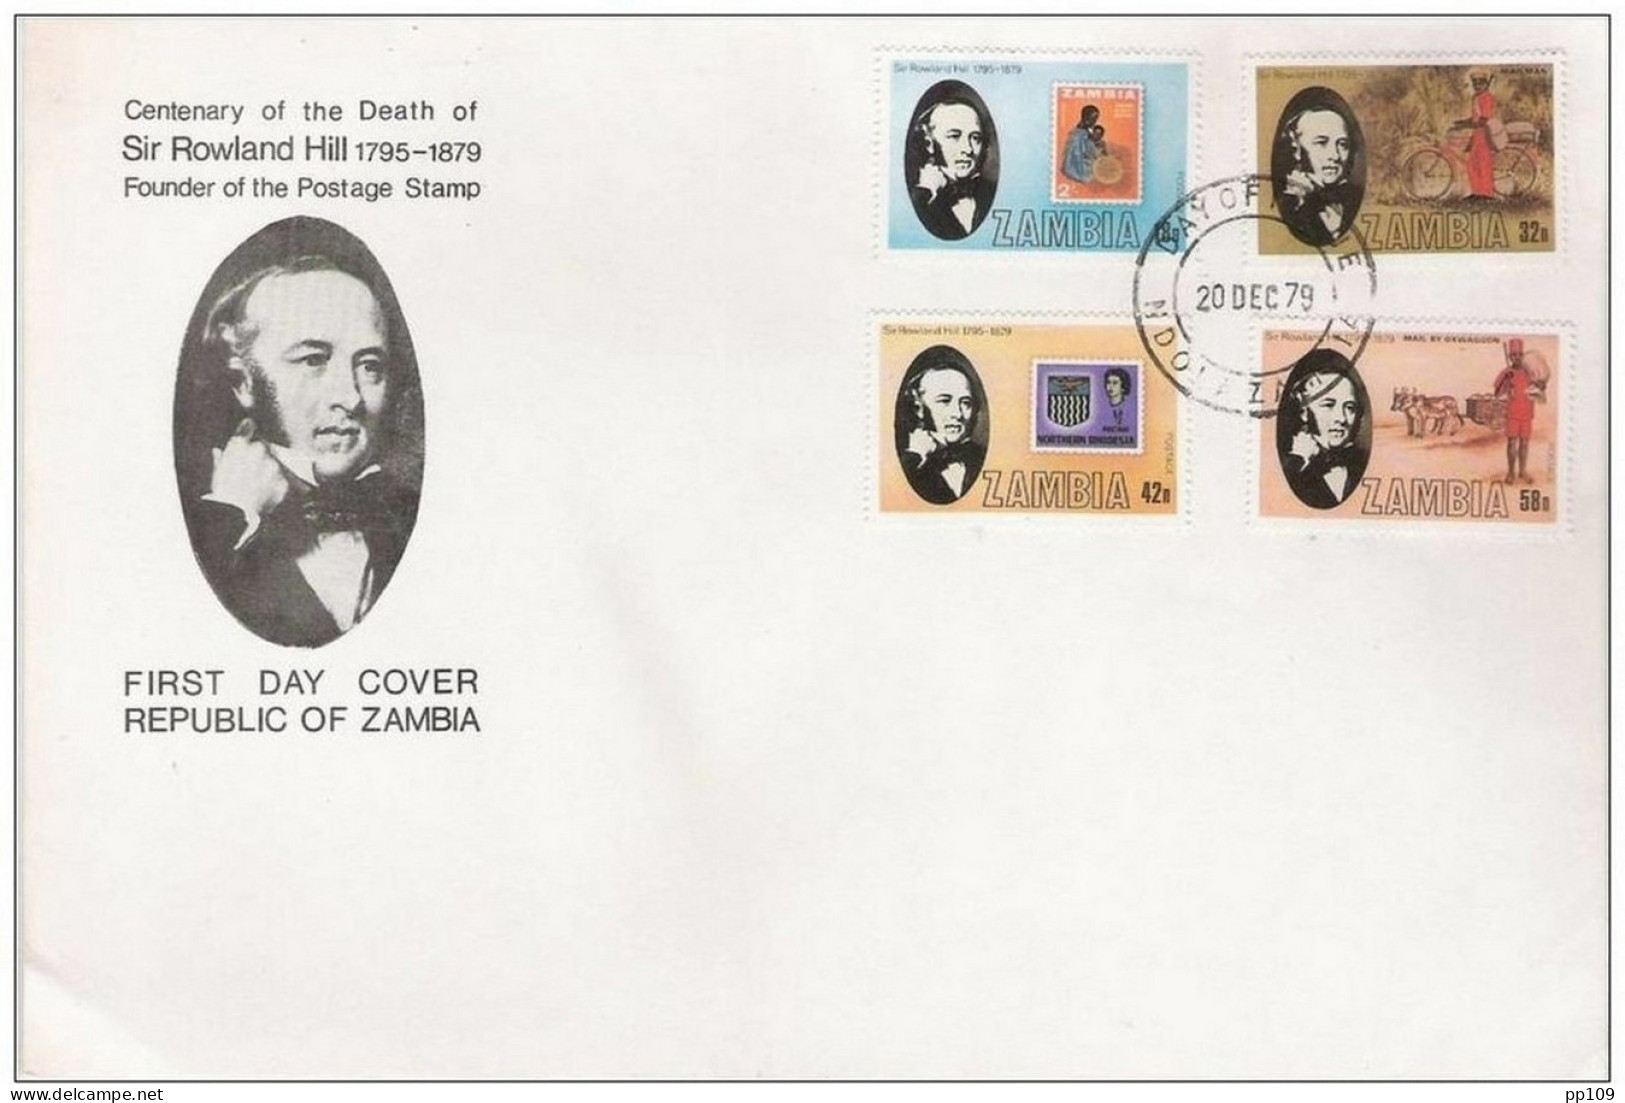 ROWLAND HILL Founder Of The Postage Stamp FDC Republic Of ZAMBIA 20 Dec 1979 - Rowland Hill